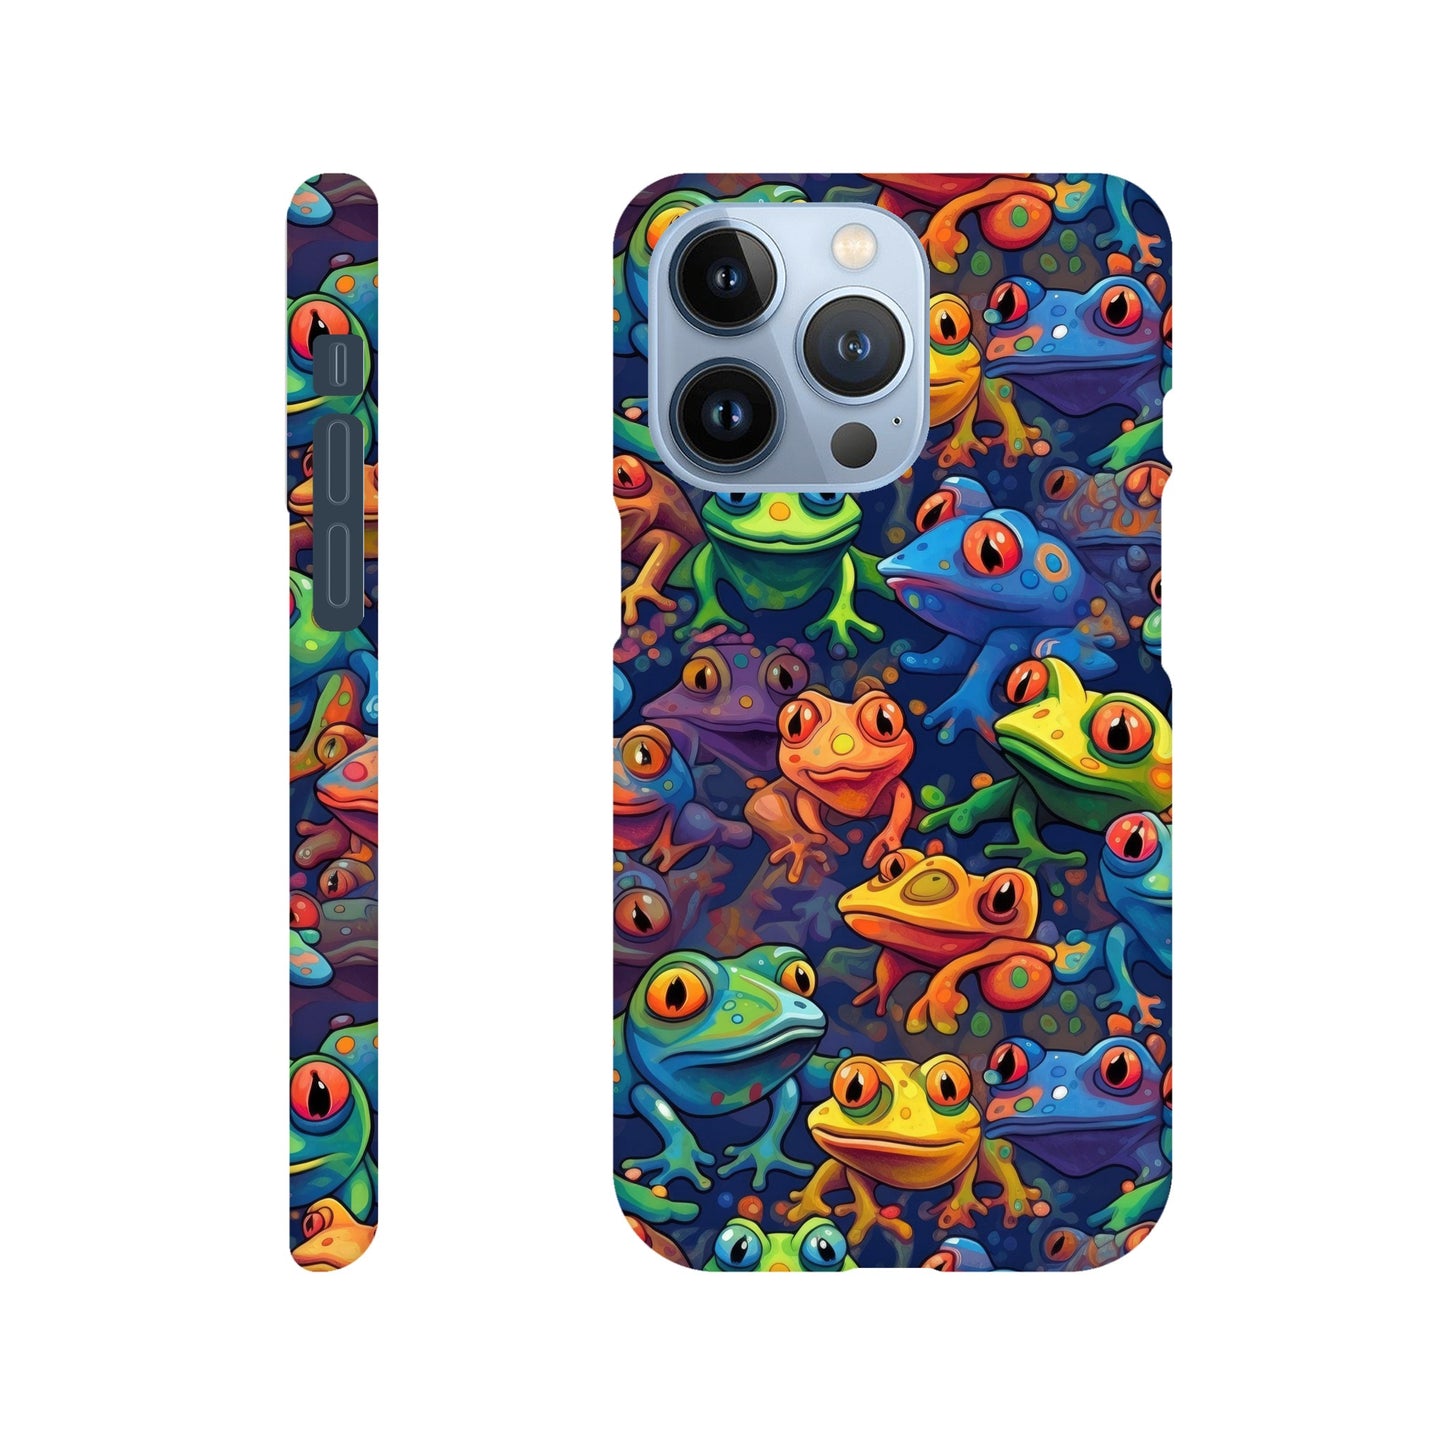 Leap into Colorful Adventures: Slim Phone Case with Playful Frog Pattern